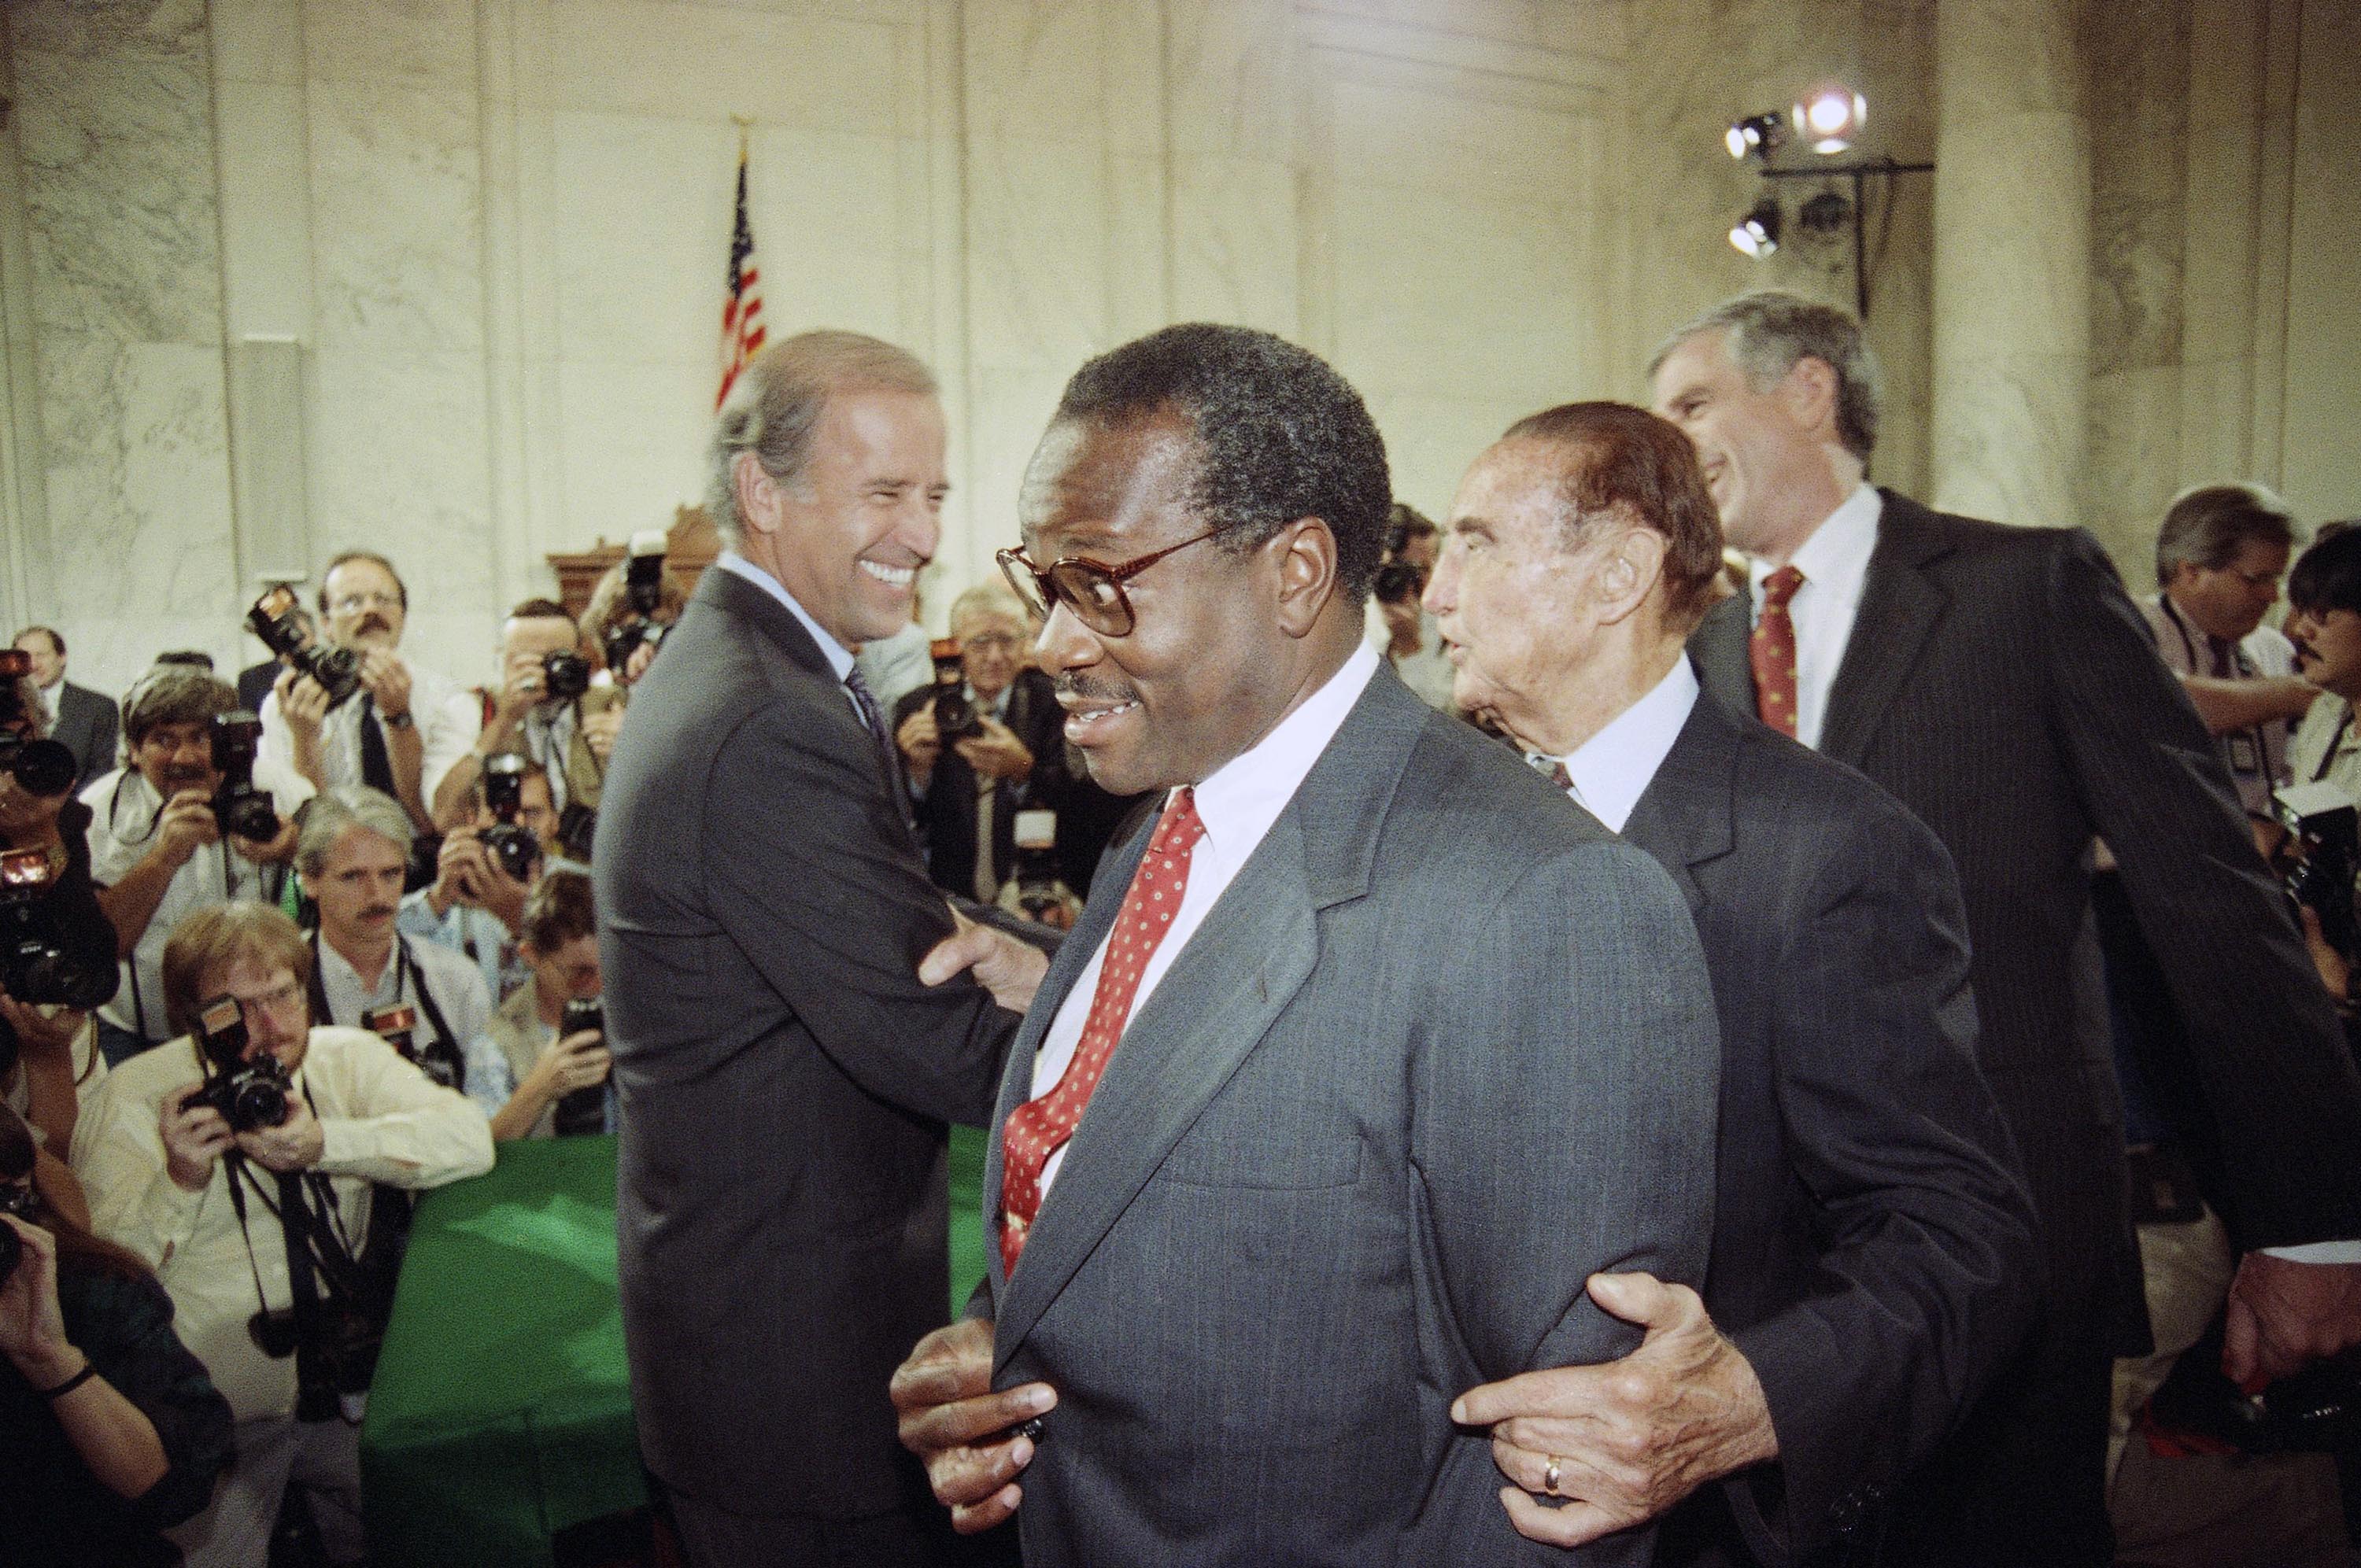 Supreme Court Justice nominee Clarence Thomas is escorted by Sen. Strom Thurmond, second from right, and Sen. John Danforth, right, while walking past then-Senate Judiciary Committee Chairman, Sen. Joseph Biden (D-Del.), left, on Capitol Hill in September 1991, prior to the start of Thomas's nomination hearing.